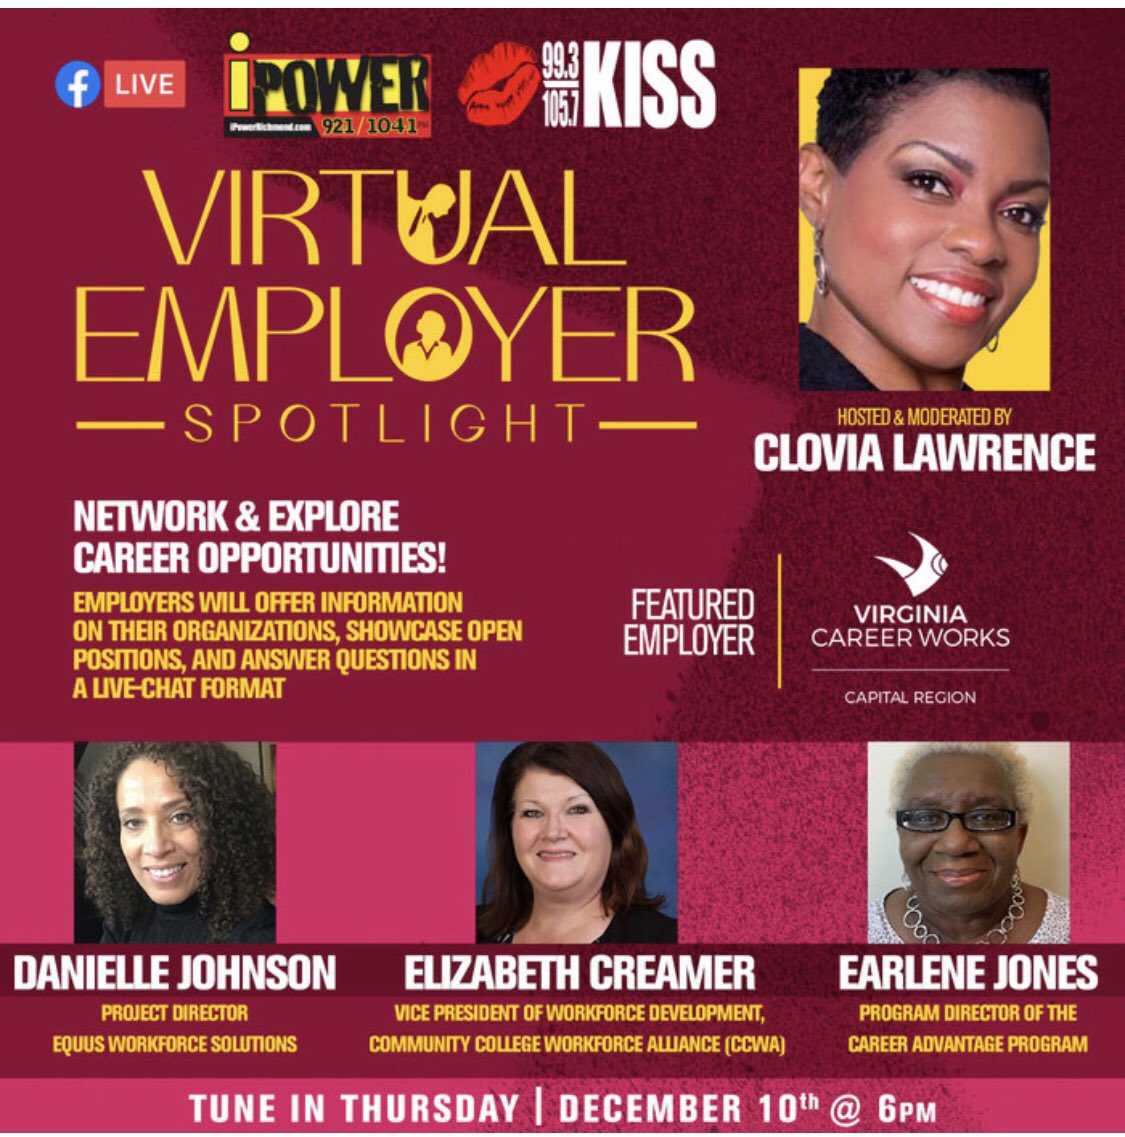 Join us Tonight on Facebook live as we discuss resources for employment and training! @KissRichmond @iPowerRichmond @COMMUNITYCLO #workforcedevelopment #vcwcapital #ccwa #training #jobs #careers